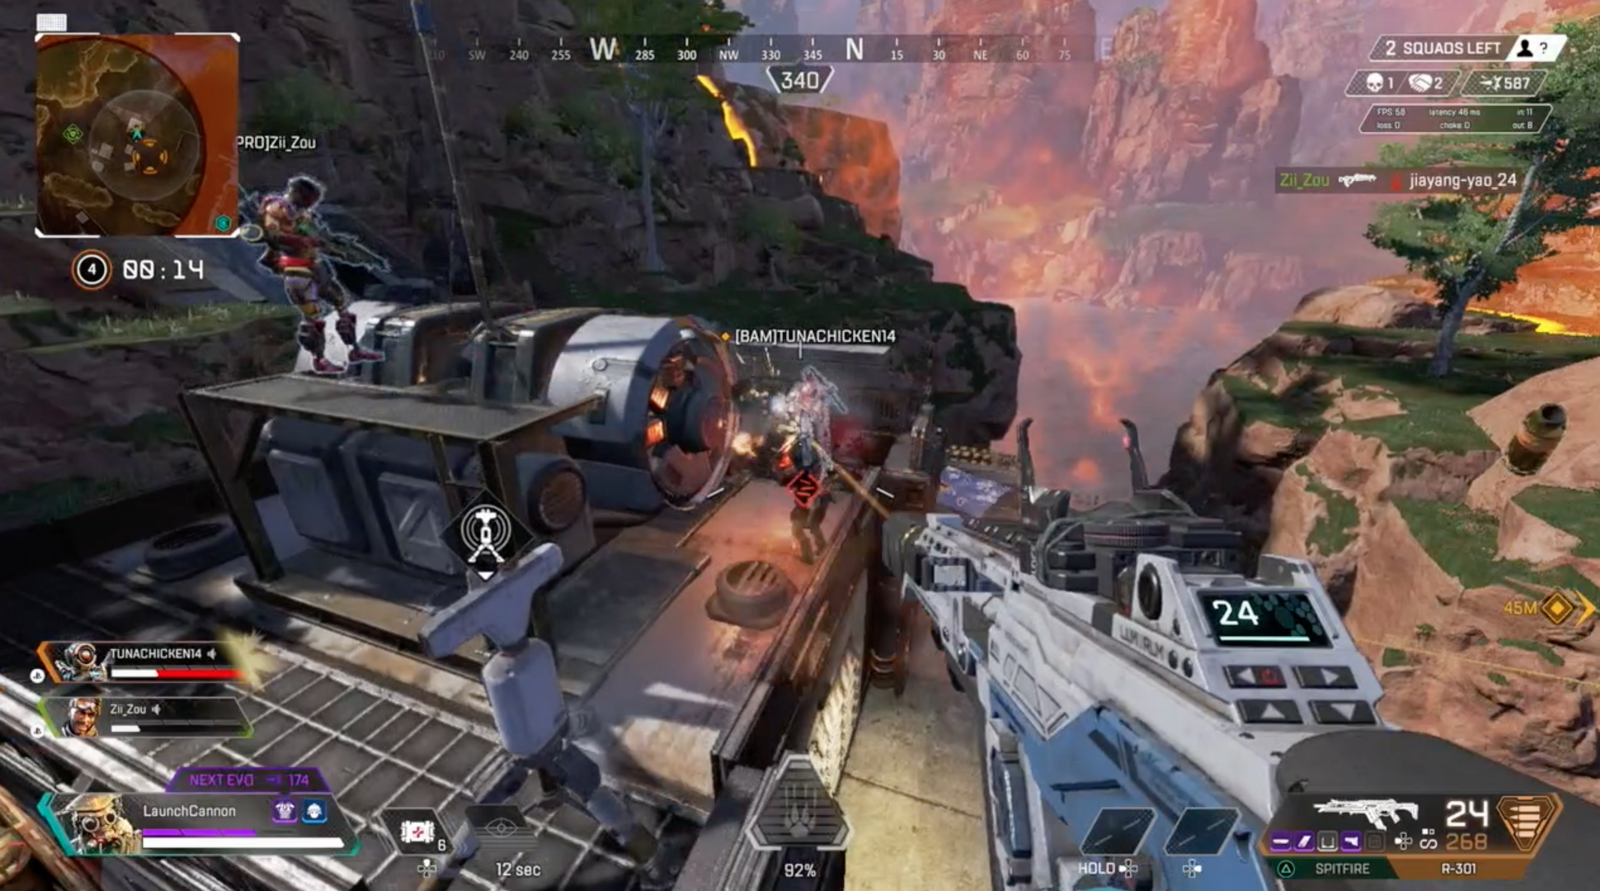 Apex Legends Mobile 60fps: how to get the best performance